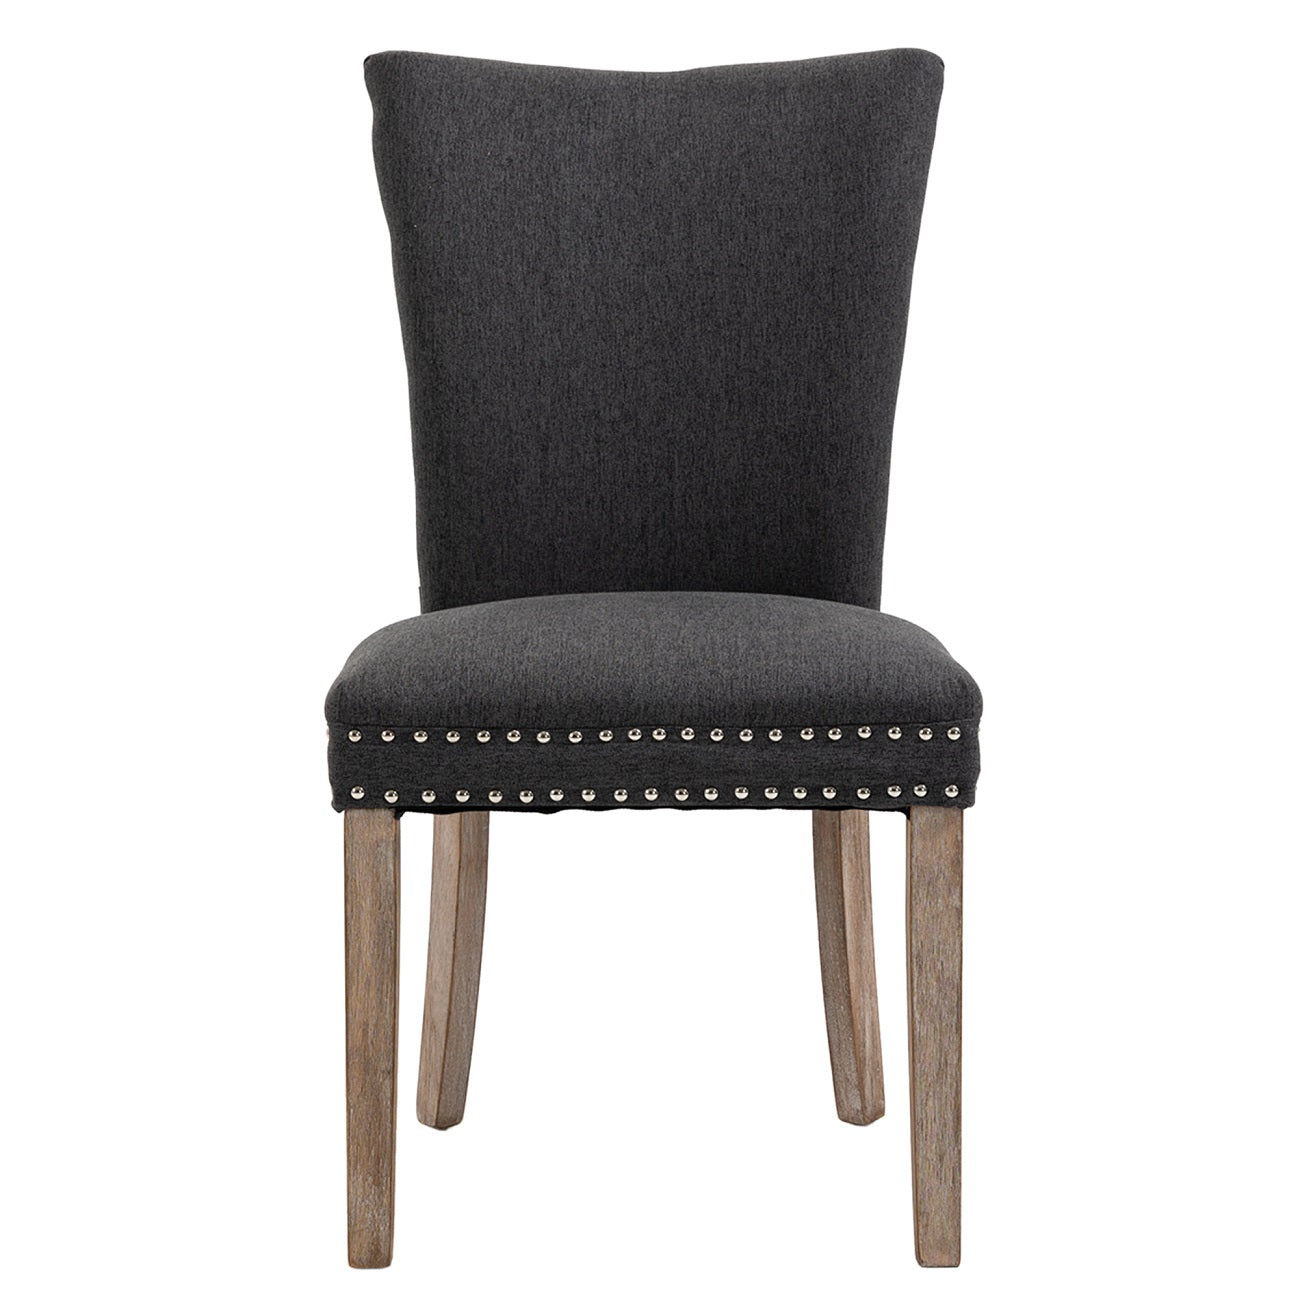 40 in. Classic Dark gray Linen Fabric Nailhead Tufted Parsons Chairs, Dining Chair with 4 Solid Wood Legs, Set of 2-Boyel Living